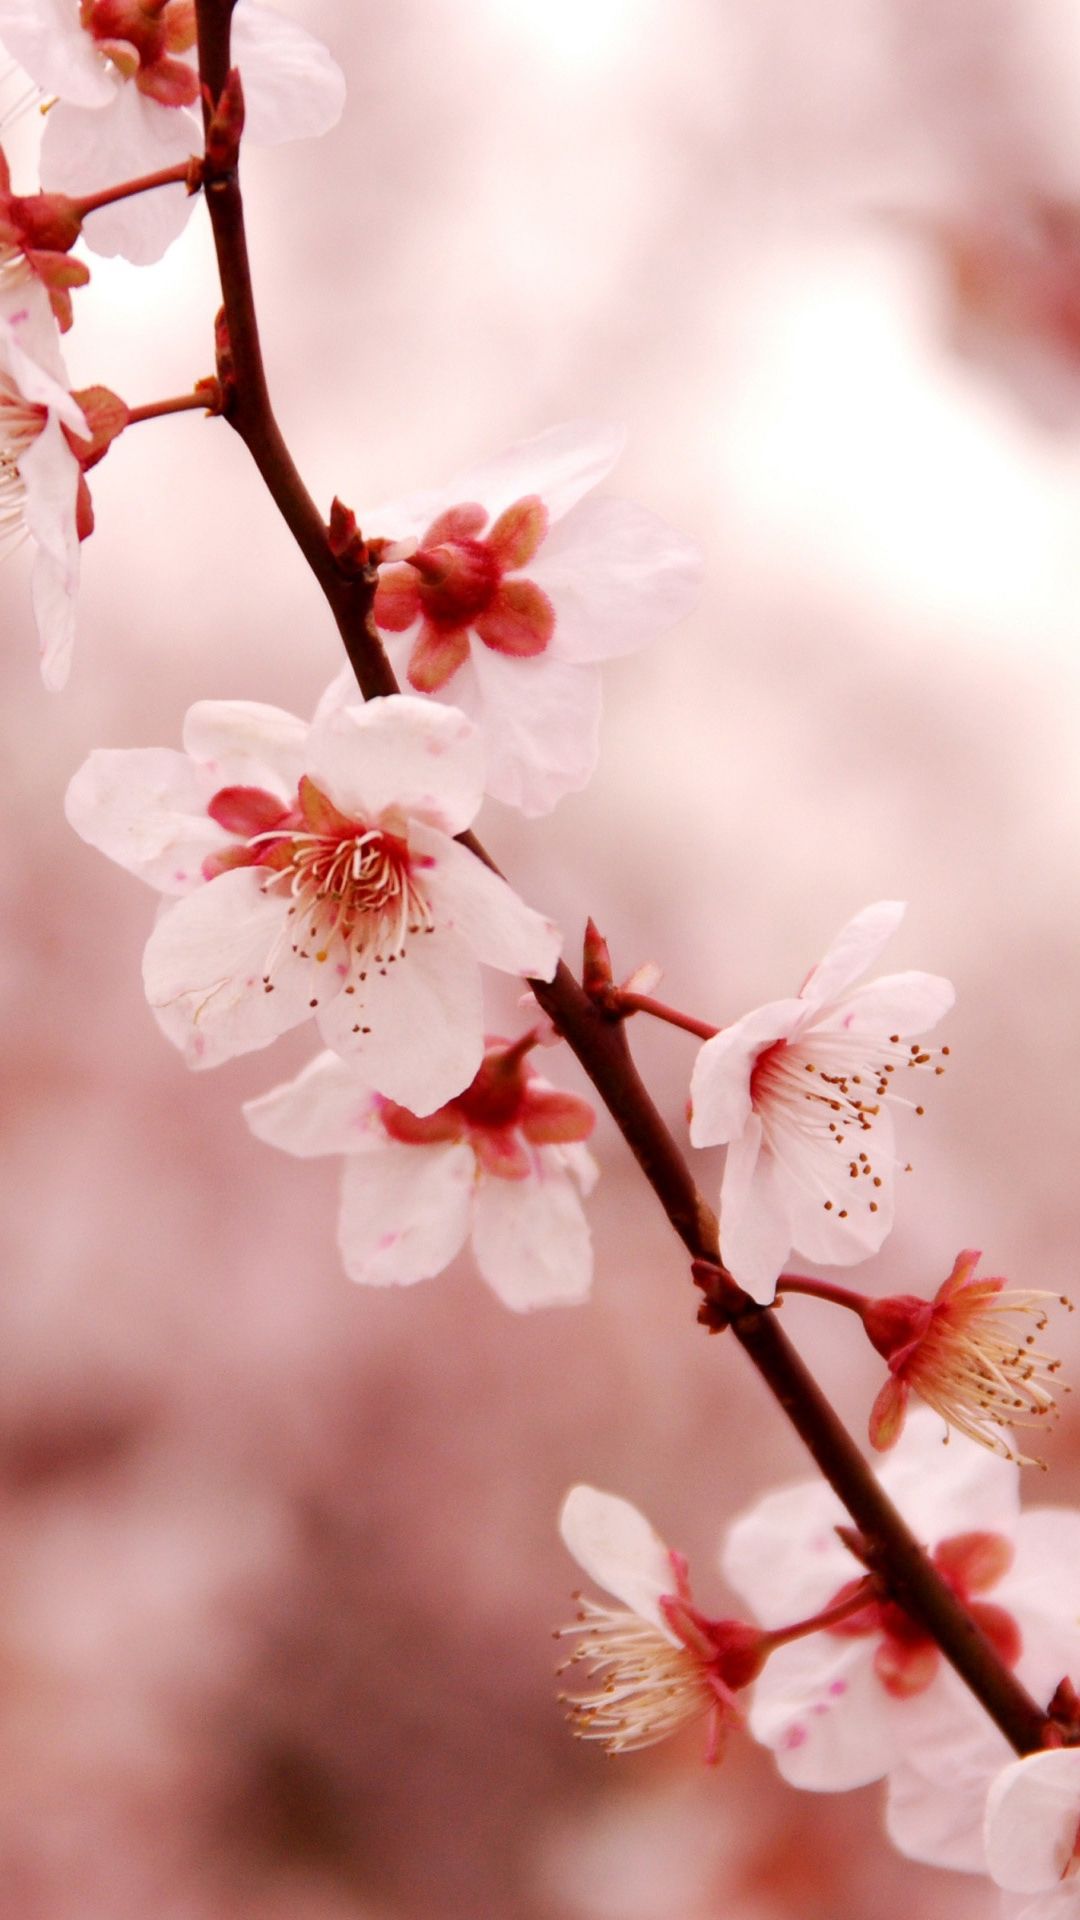 Premium AI Image  Cherry blossom wallpapers for iphone and android these  are the best wallpapers for iphone and android iphone wallpapers for iphone  android android and iphone iphone wallpaper